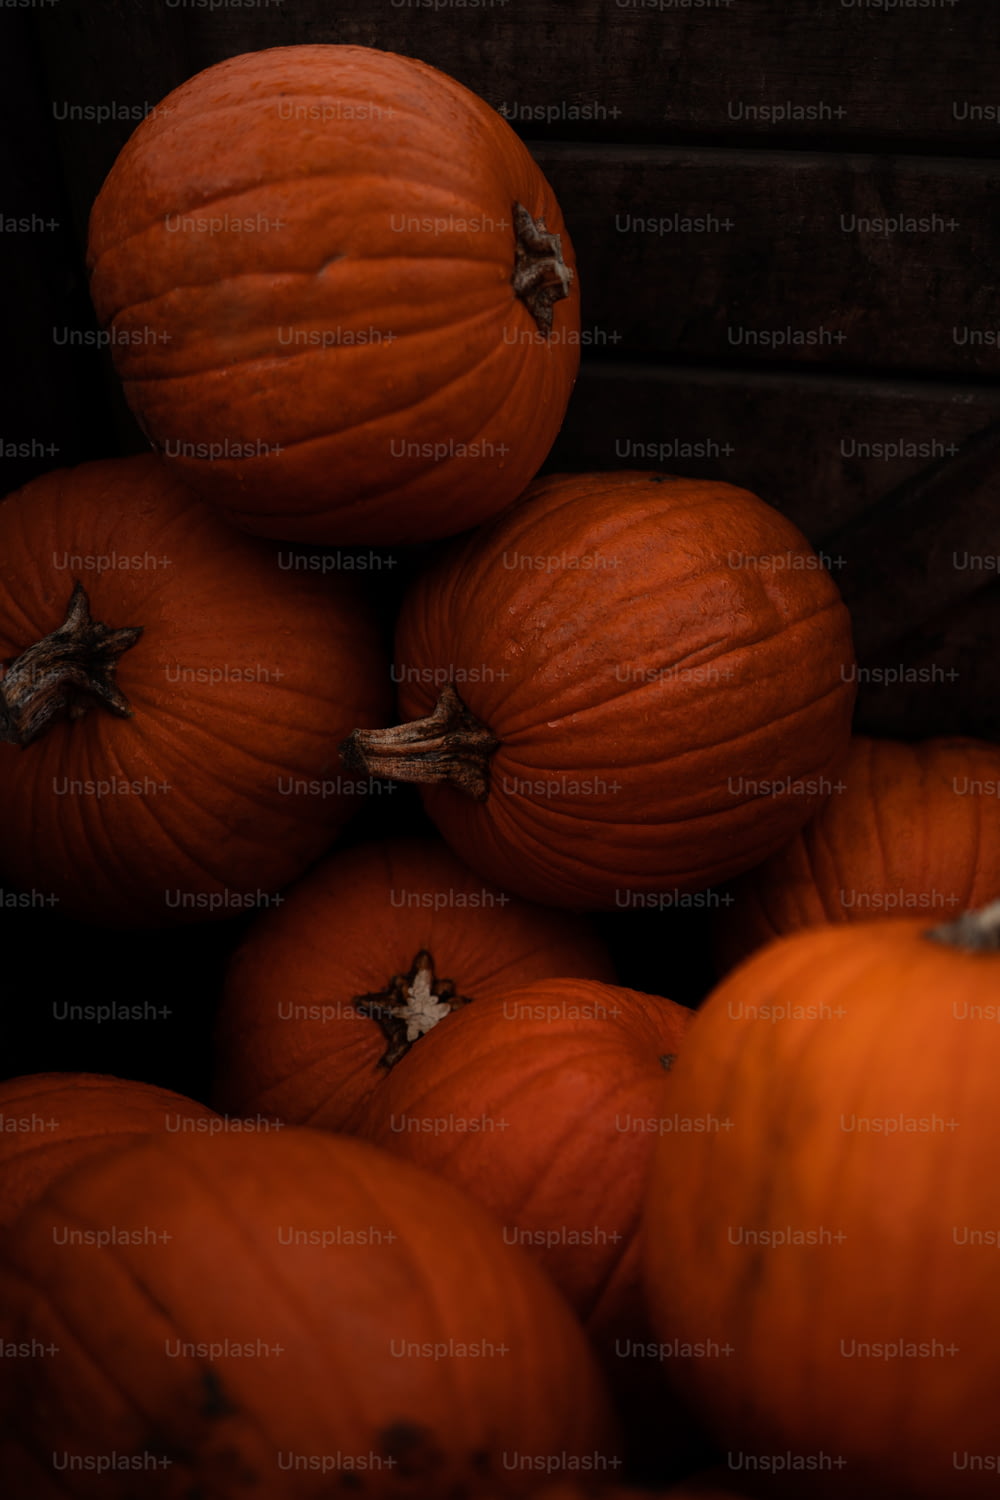 a pile of pumpkins sitting on top of each other